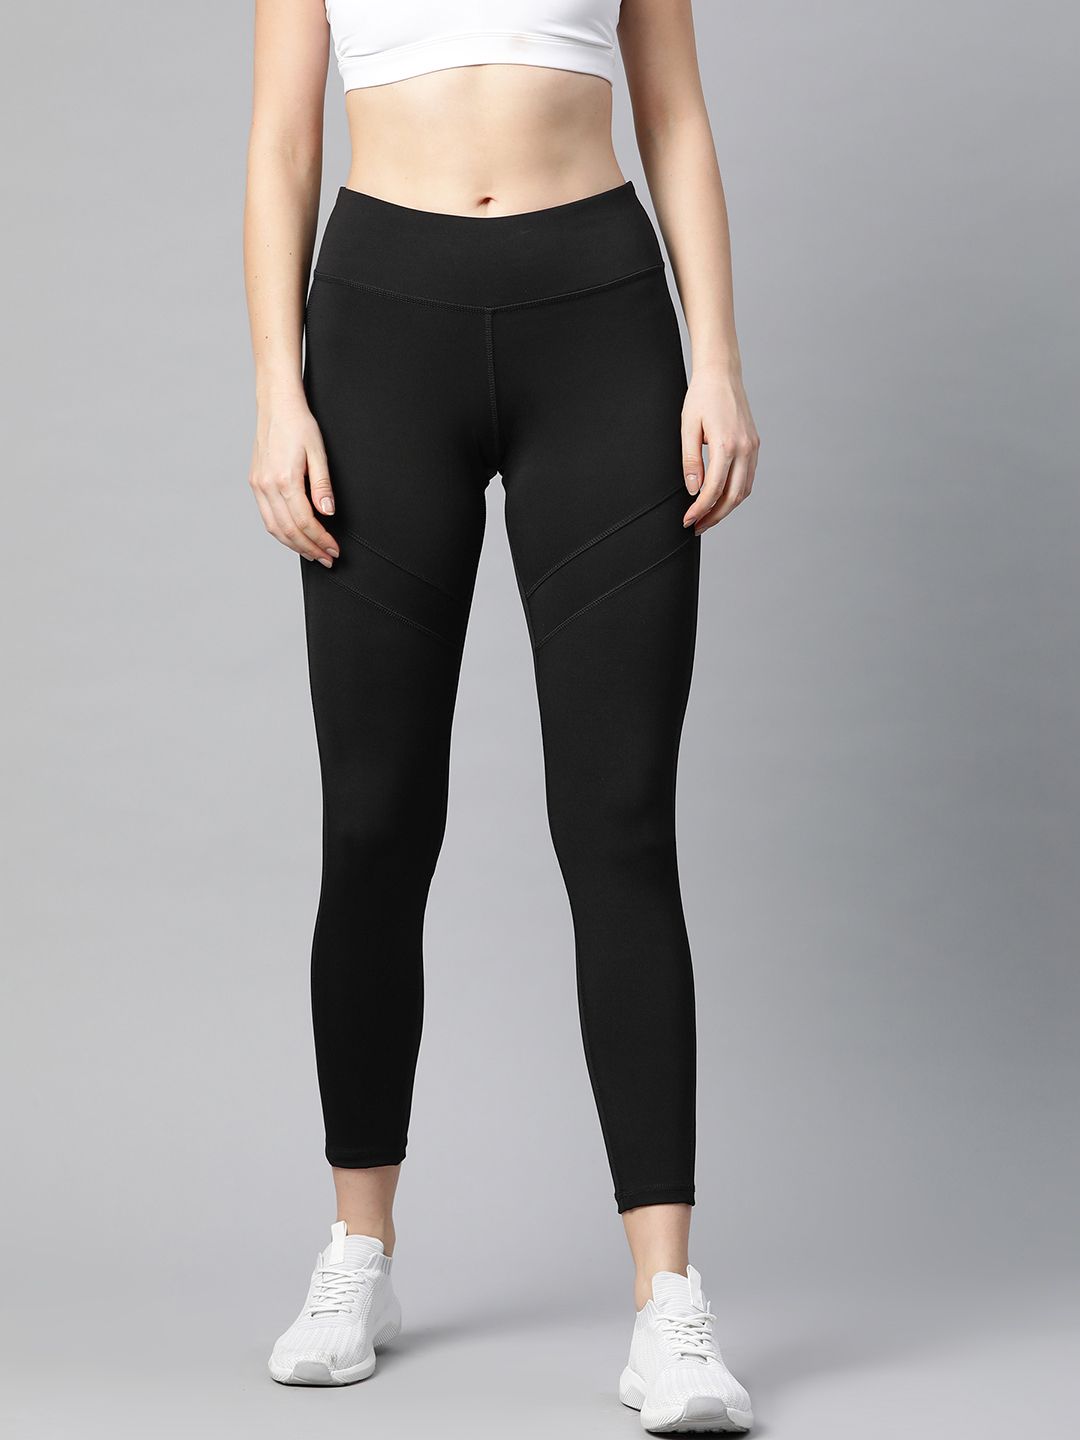 Reebok Women Black Solid WOR Mesh Cropped Training Tights Price in India